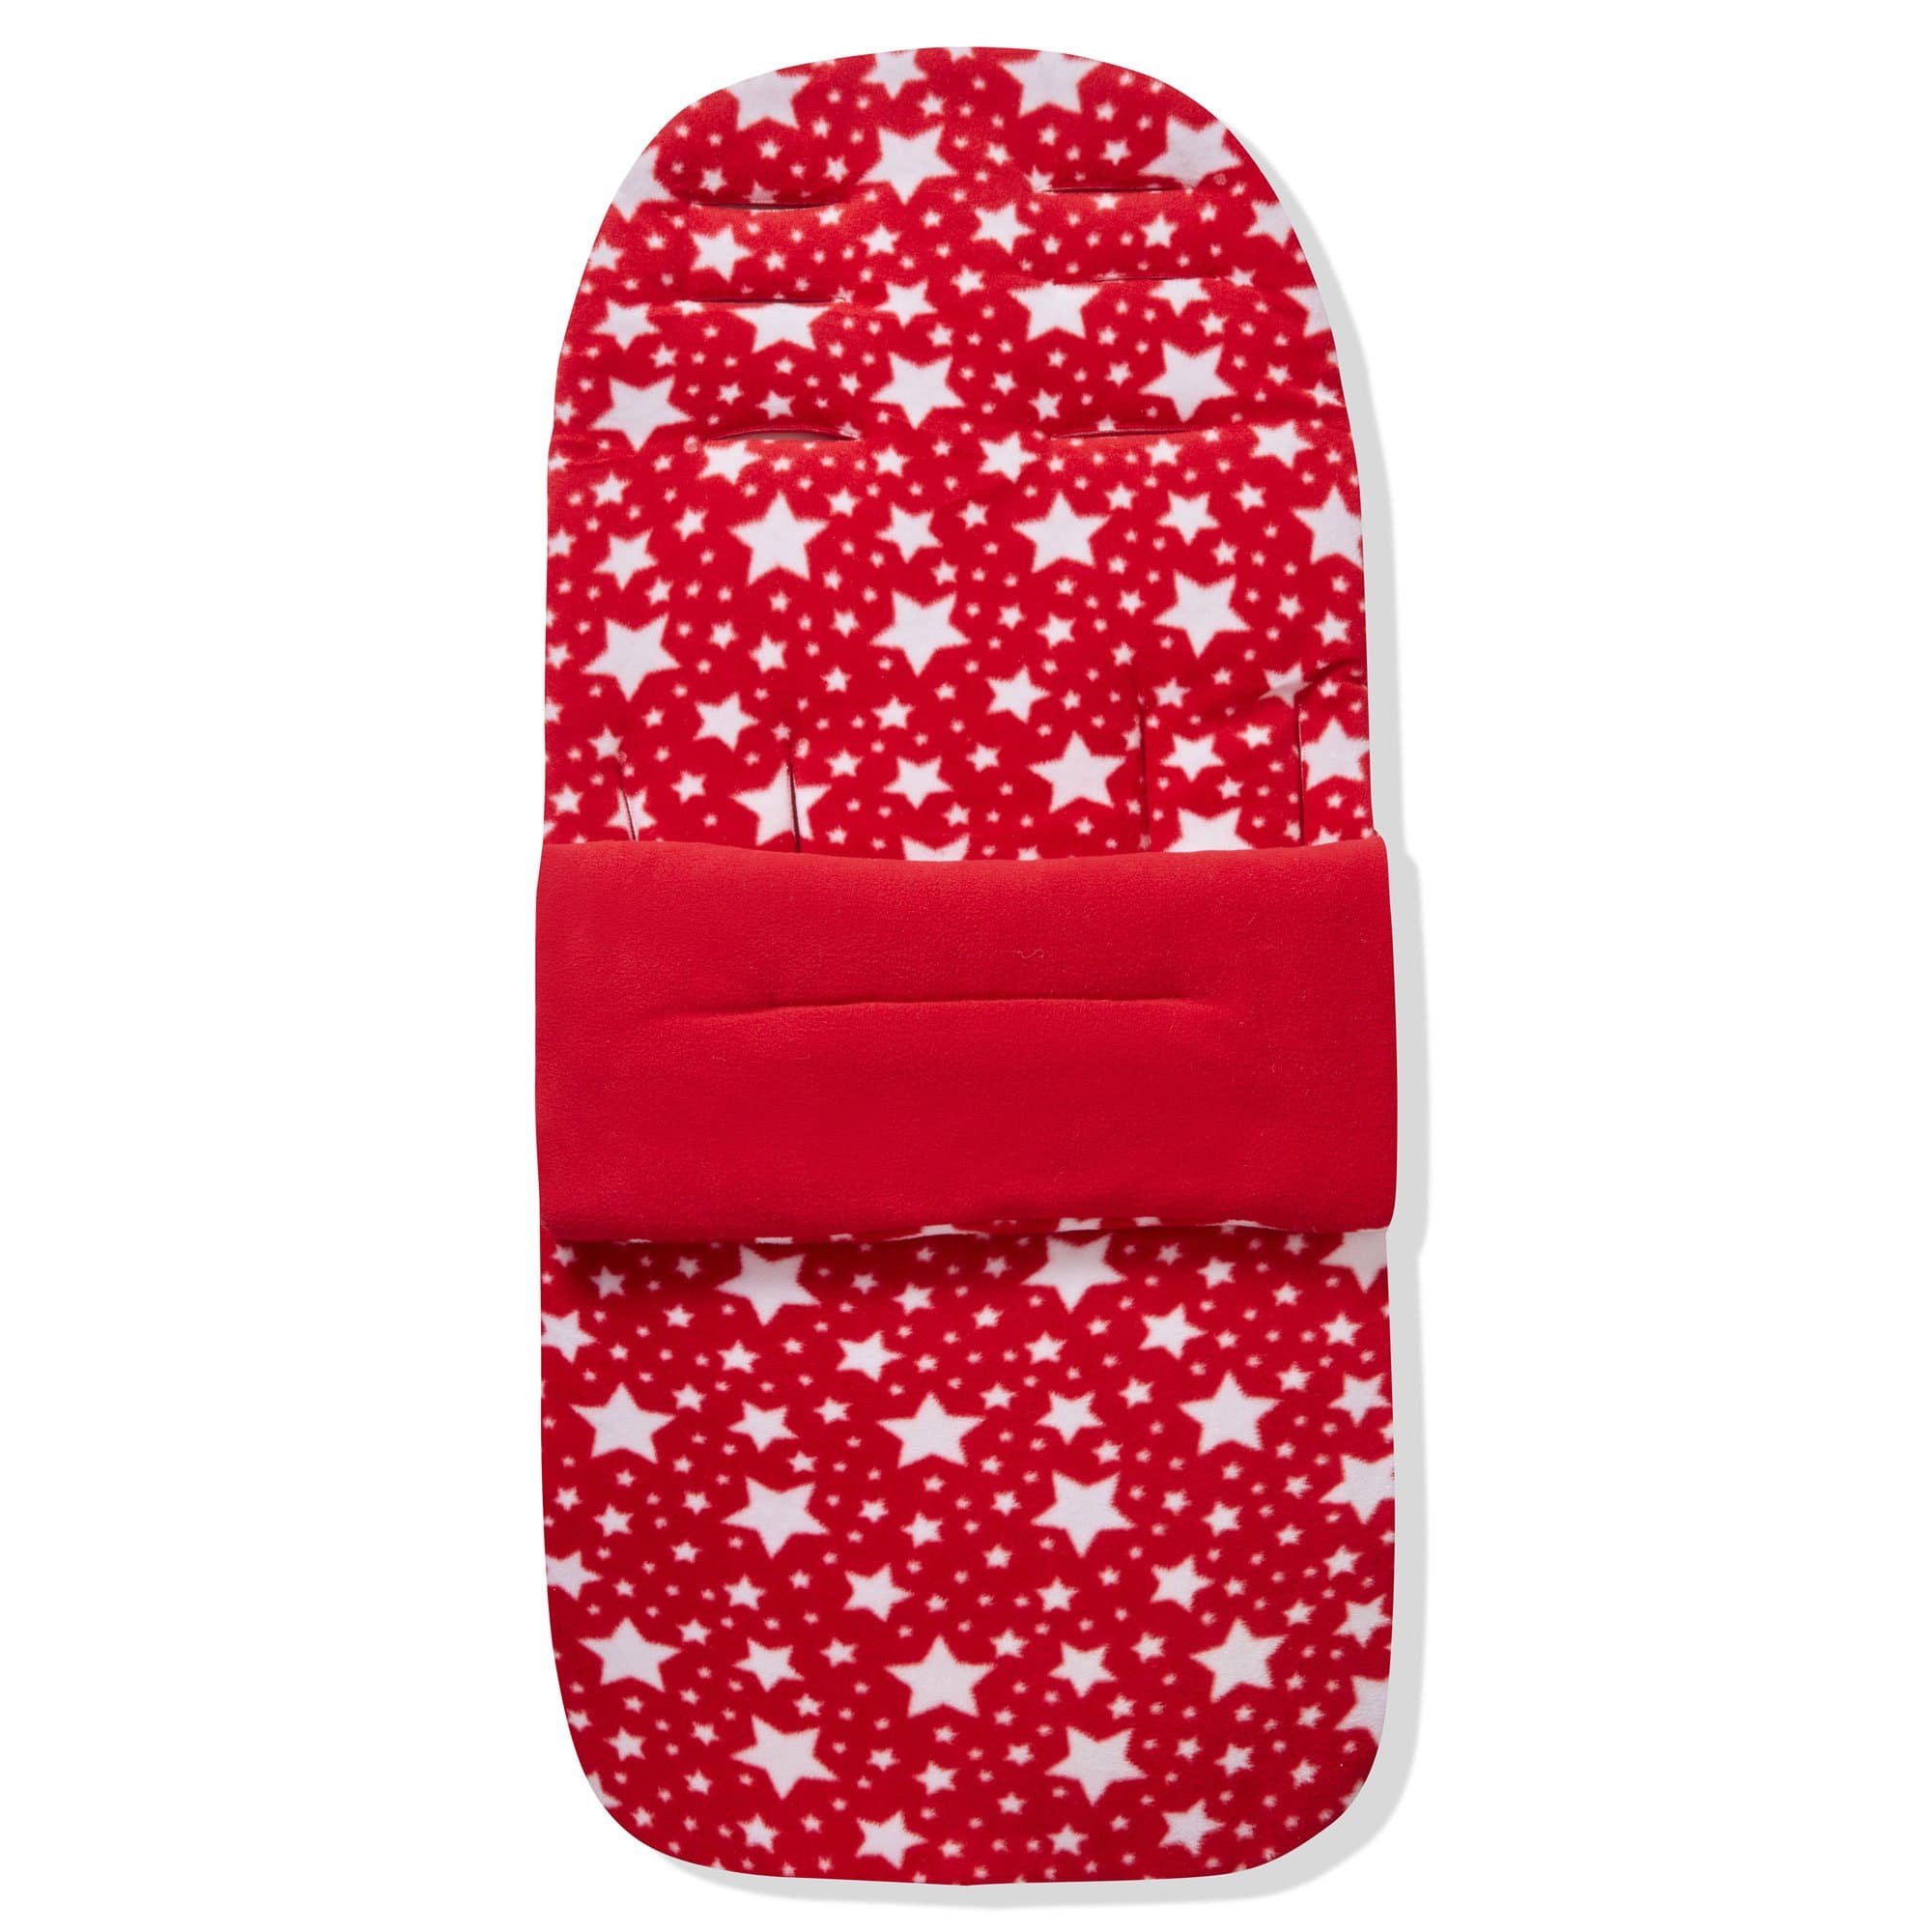 Fleece Footmuff / Cosy Toes Compatible With Baby Trend - Red Star / Fits All Models | For Your Little One